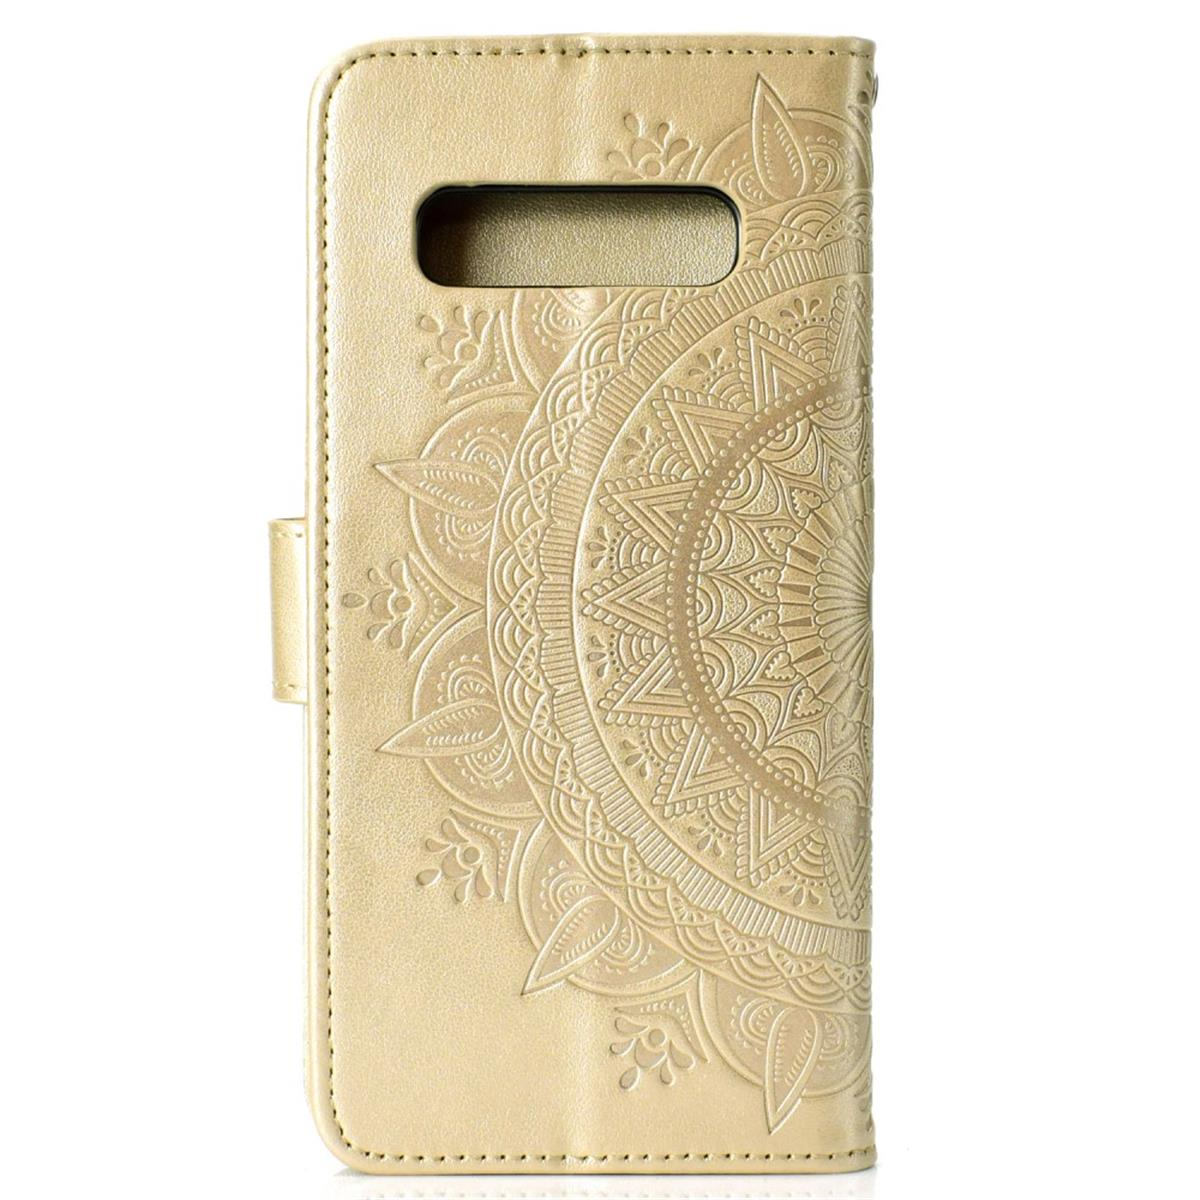 COVERKINGZ Klapphülle Bookcover, Mandala S10+ Galaxy [Plus], Gold Samsung, Muster, mit